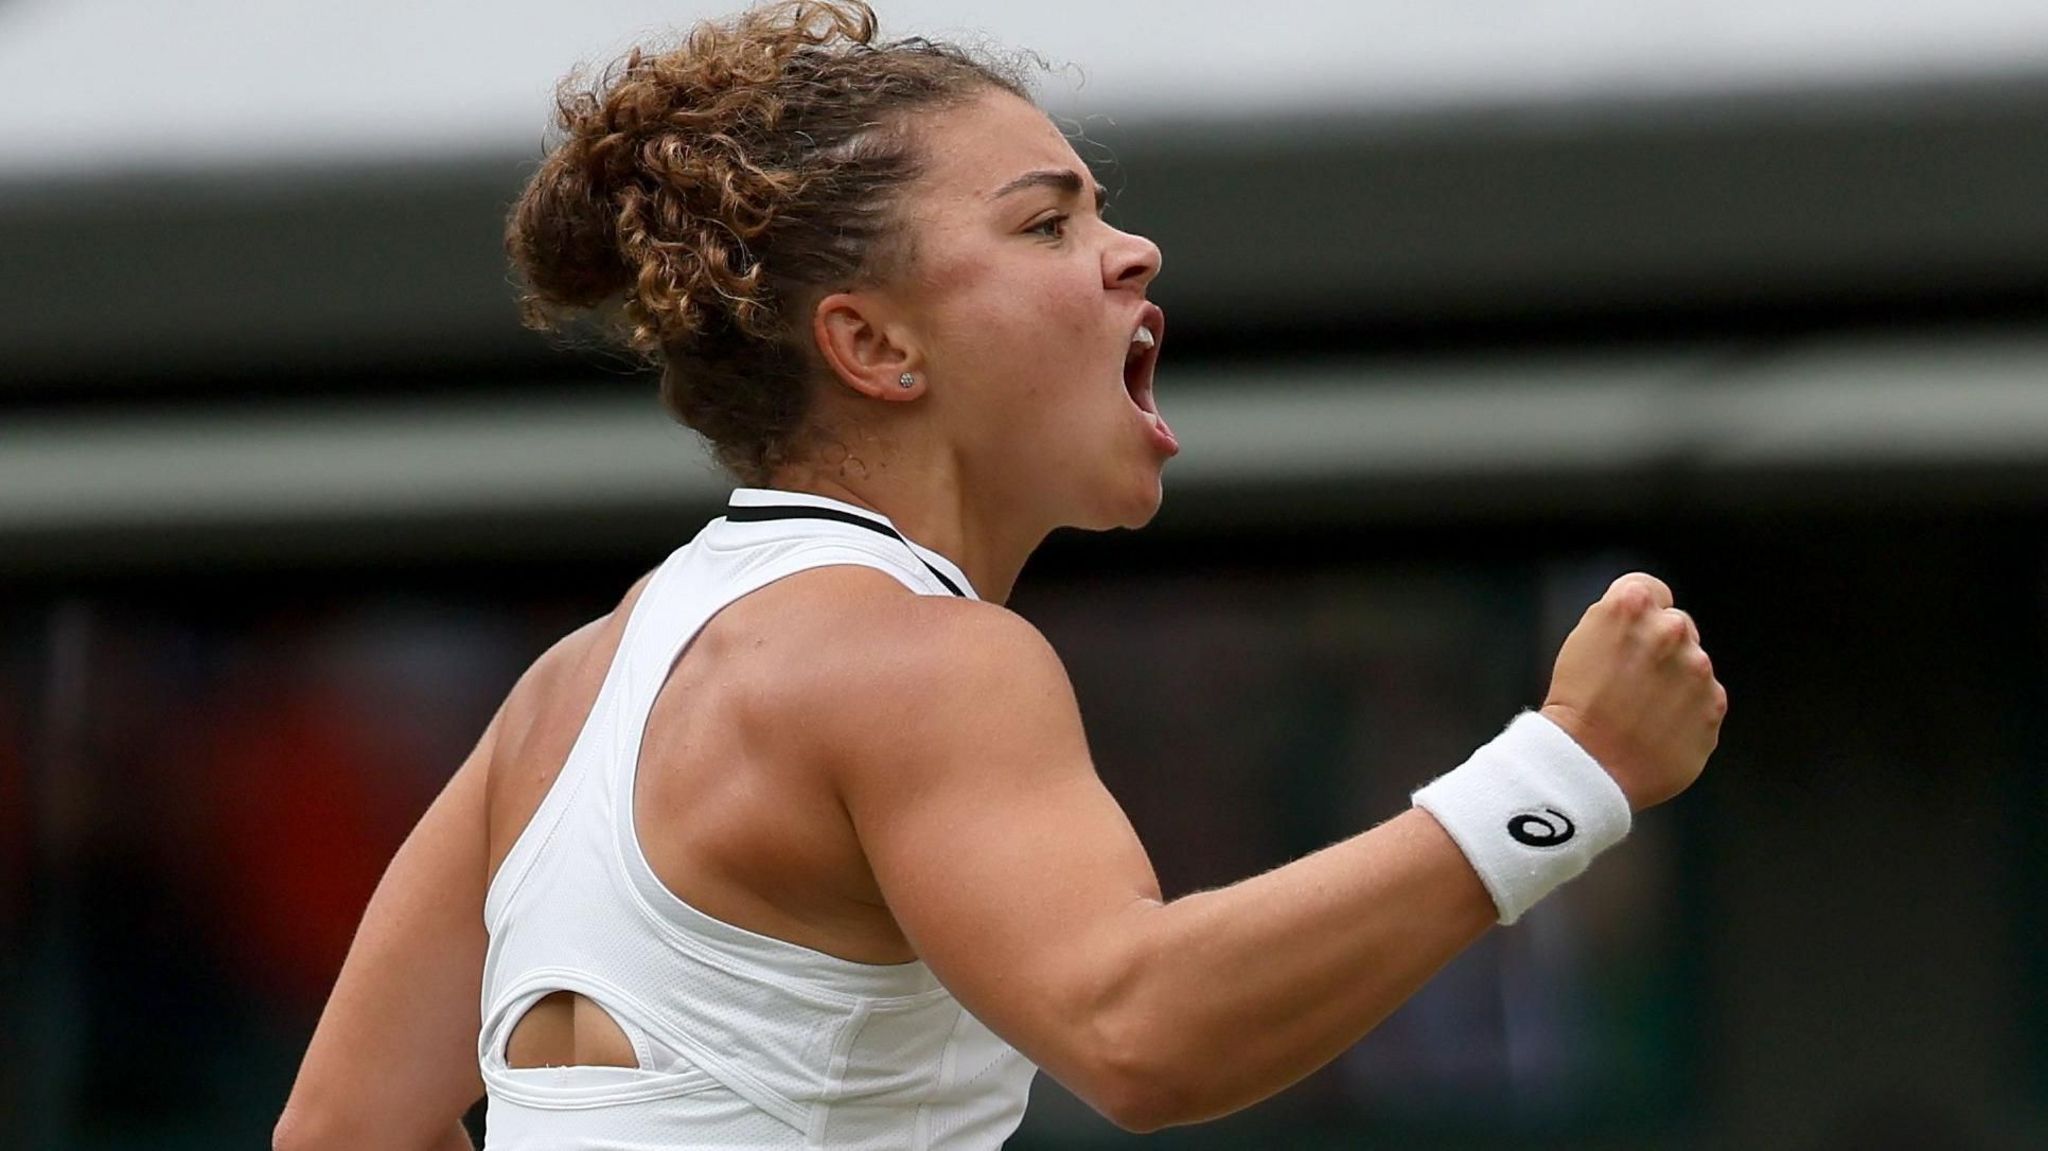 Jasmine Paolini shouts and pumps her first after winning a point in her Wimbledon third-round match against Bianca Andreescu